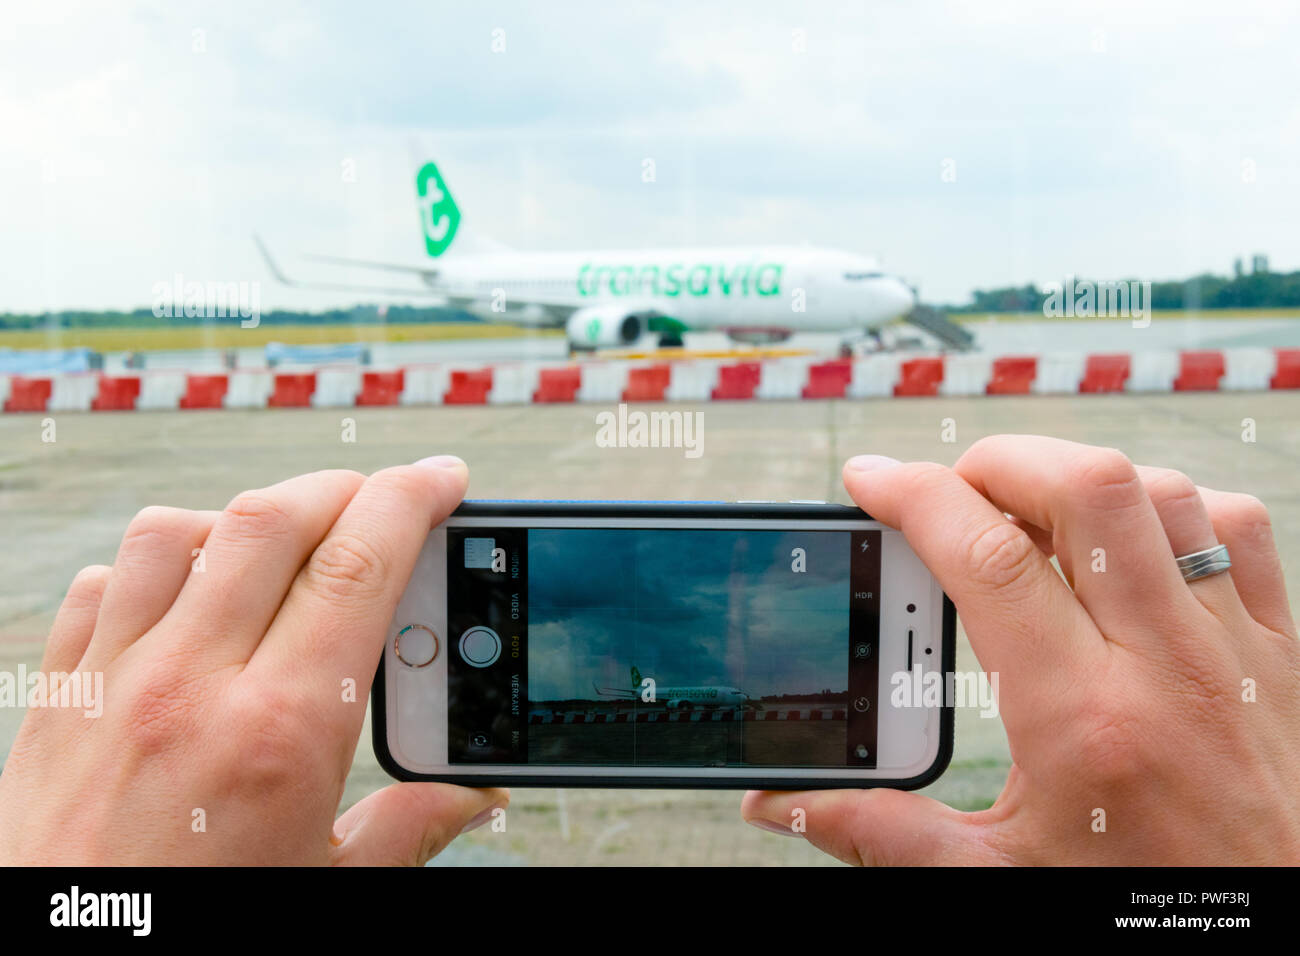 Groningen, Eelde Airport, Netherlands, August 15, 2018: View of a man's hands making photo on mobile phone of Transavia boeing 737-800 on airport Stock Photo